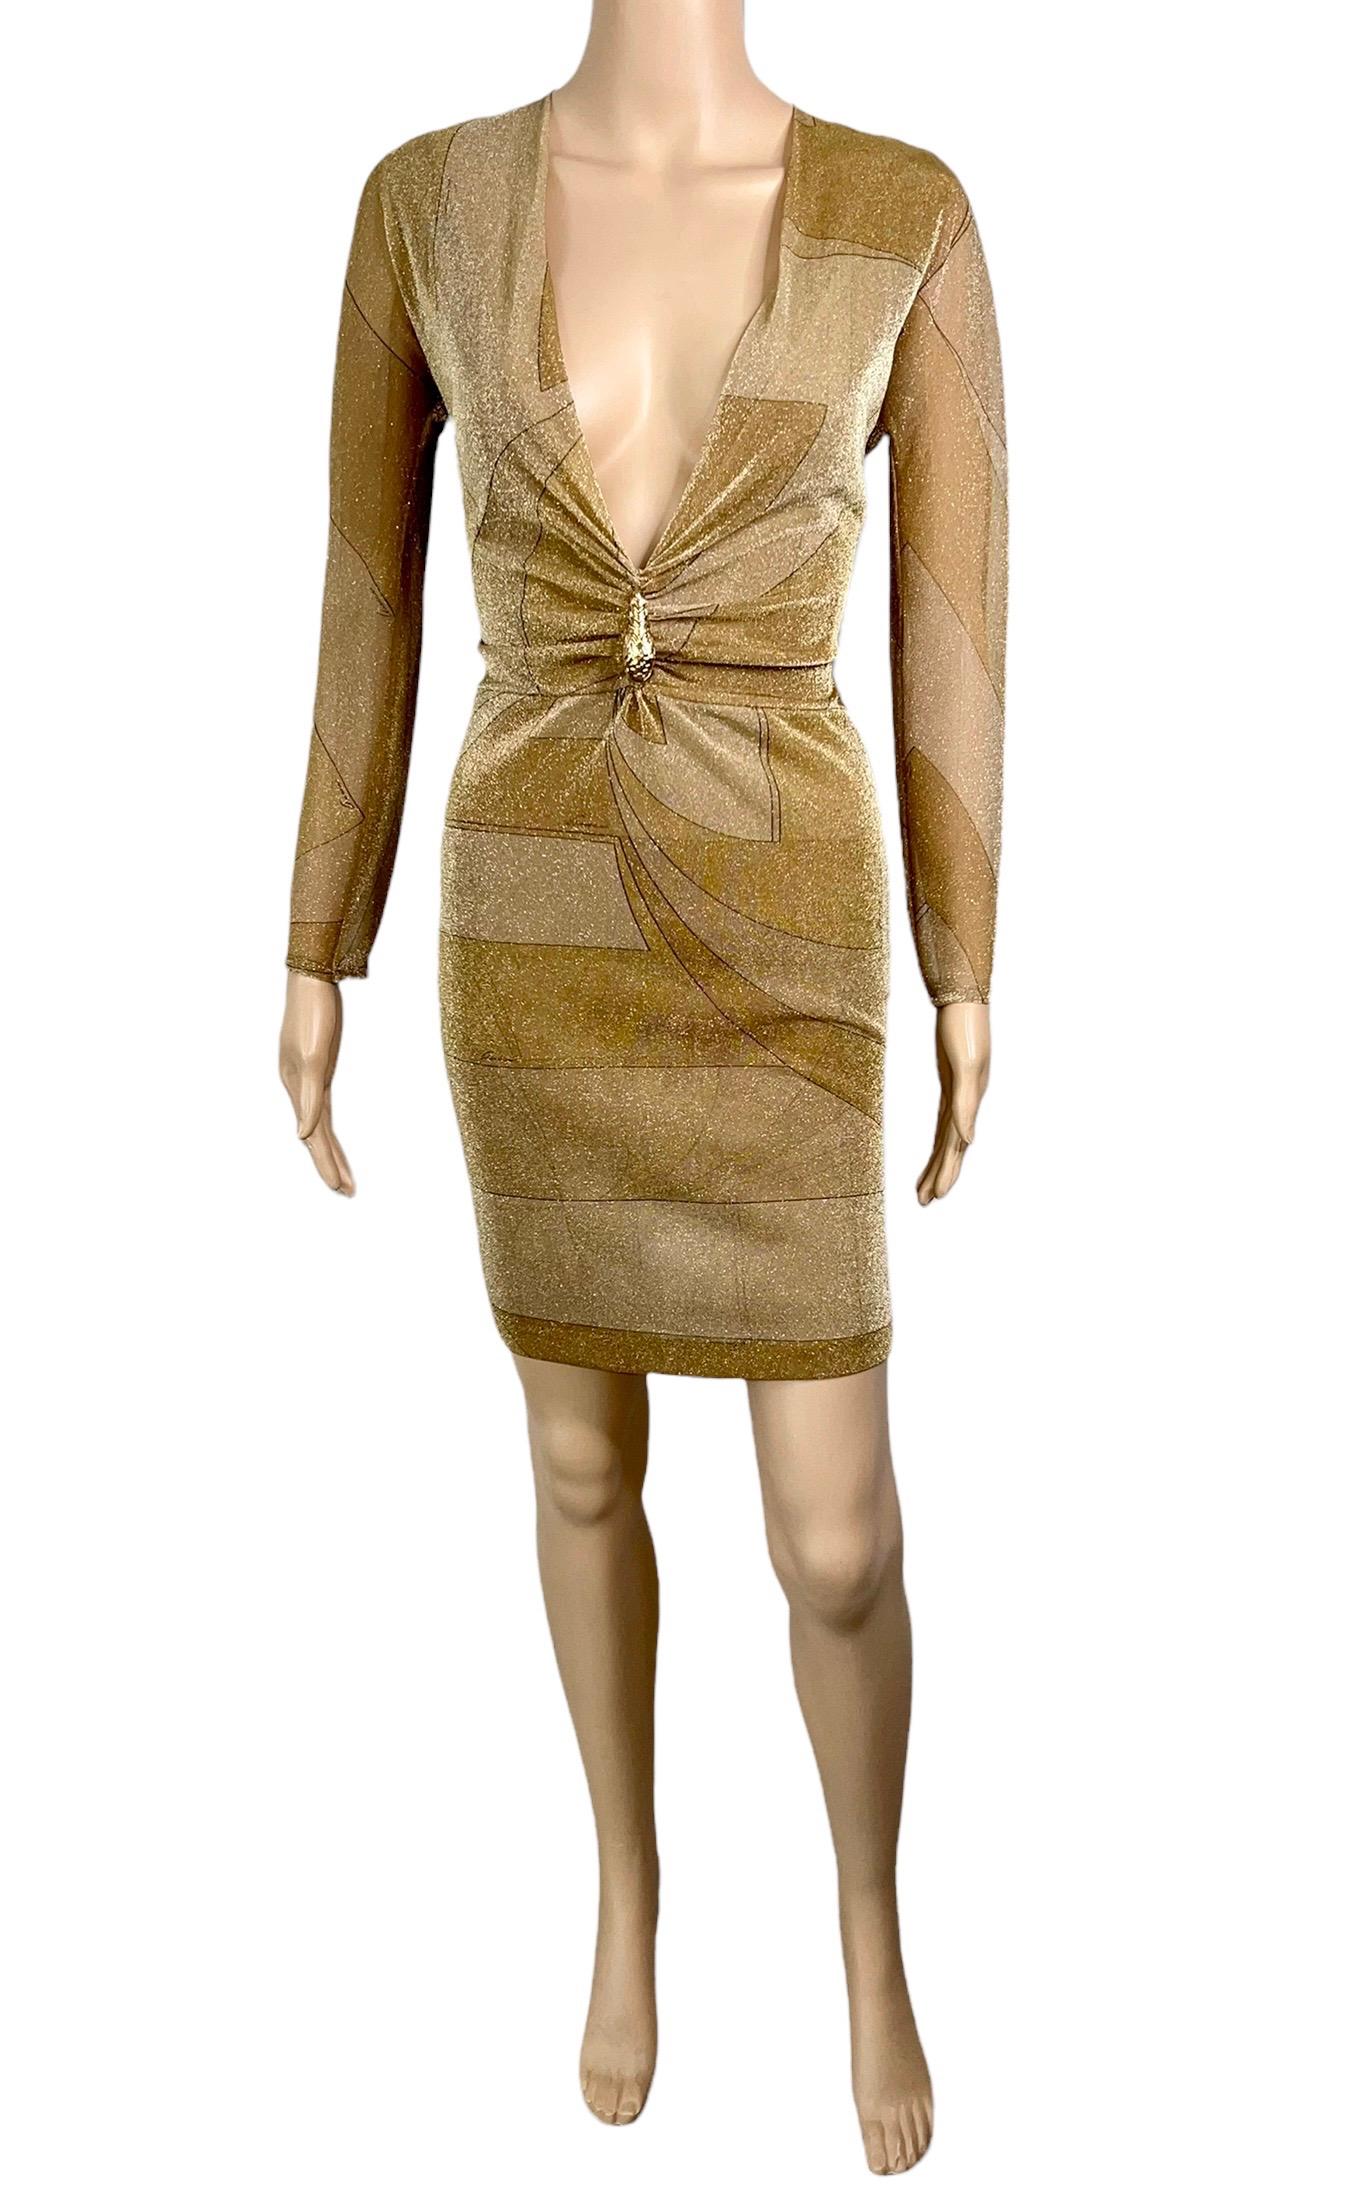 Tom Ford for Gucci F/W 2000 Runway Plunged Neckline Metallic Knit Mini Dress IT 38

Look 28 from the Fall 2000 Collection. 

Excellent Condition.